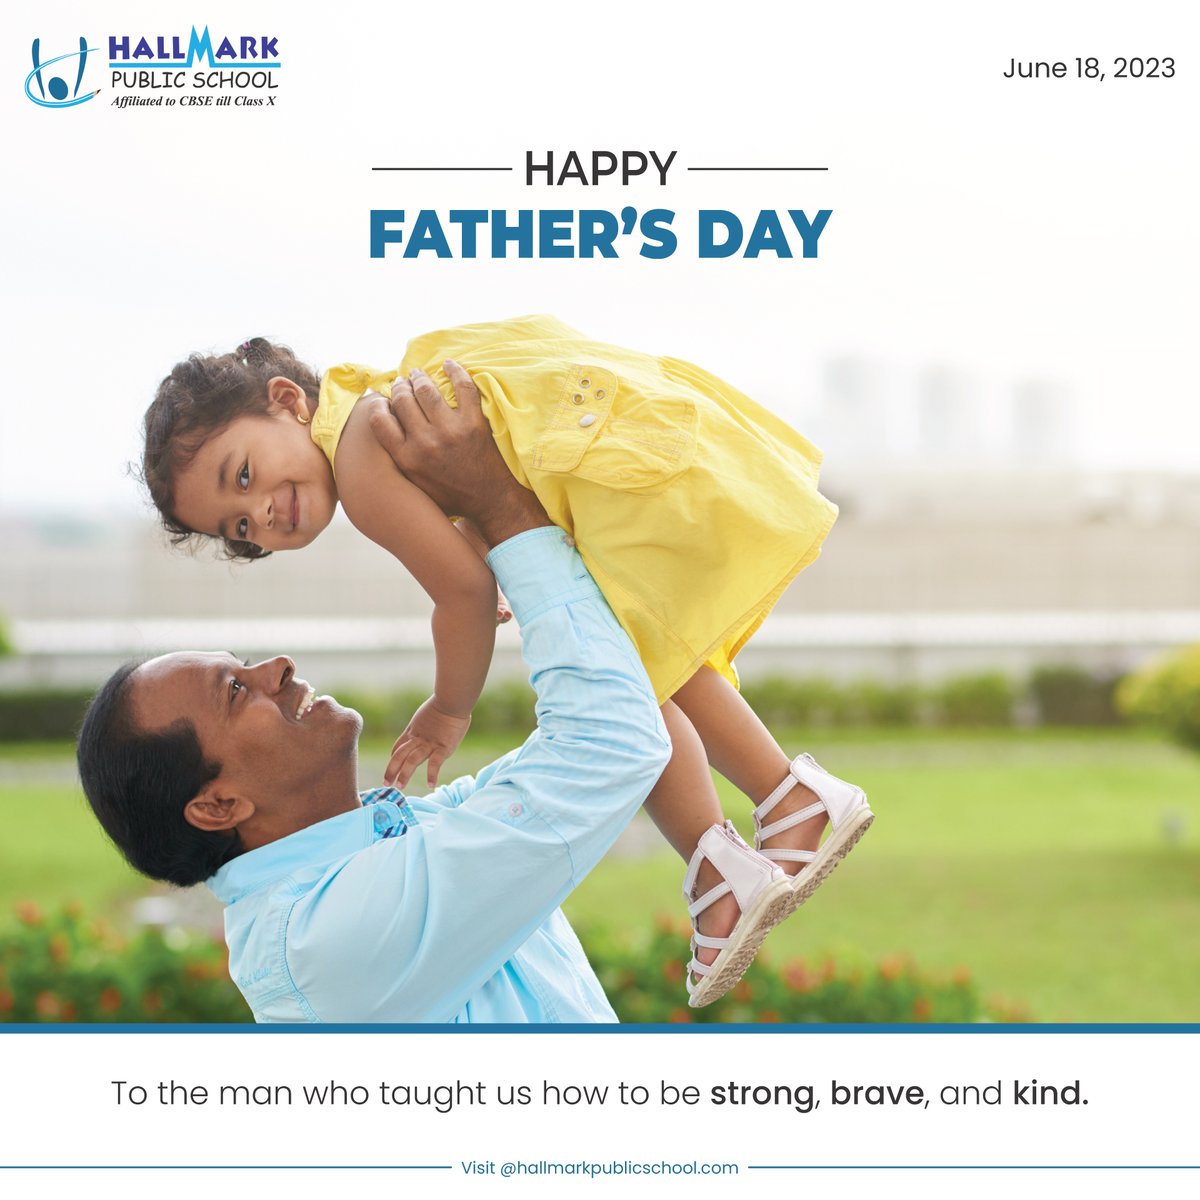 Happy Father's Day to all the dads who have shown us the true meaning of resilience, determination and strength. 

#FathersDay #BestDadEver #Hallmarkites #HallmarkSchool #LifelongLearning #CBSESchoolInPanchkula #Education #School #Learning #PanchkulaDiaries #LearningIsFun